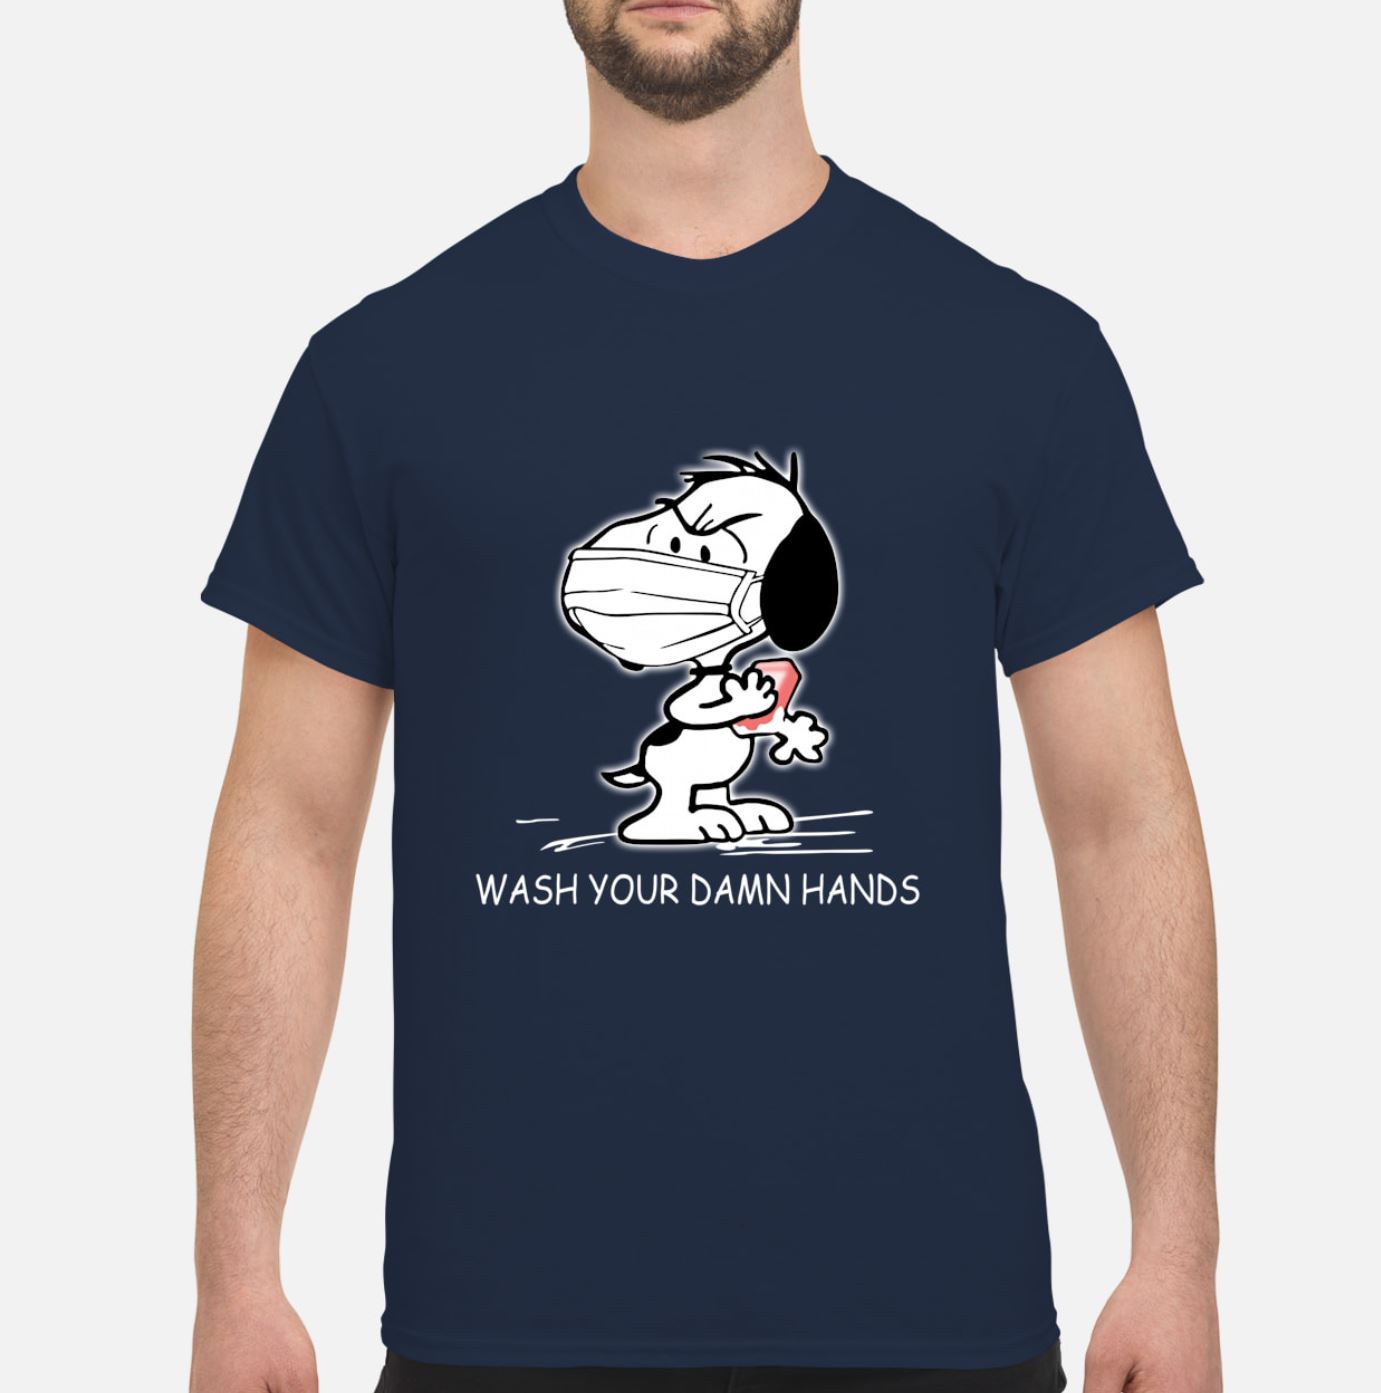 Snoopy wearing mask wash your damn hands t-shirt - Copy